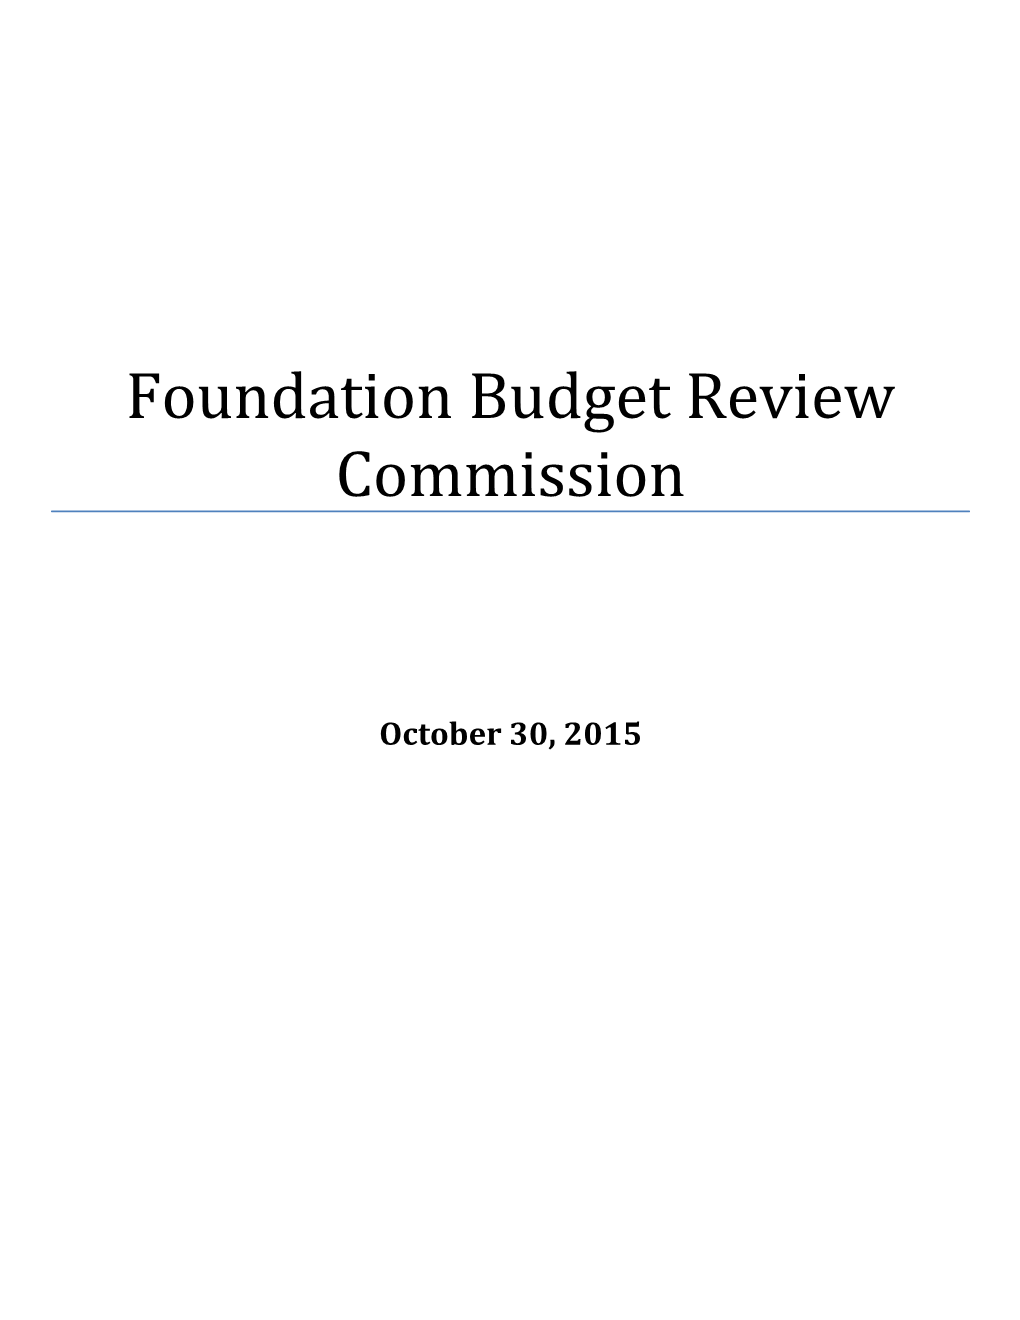 Foundation Budget Review Commission